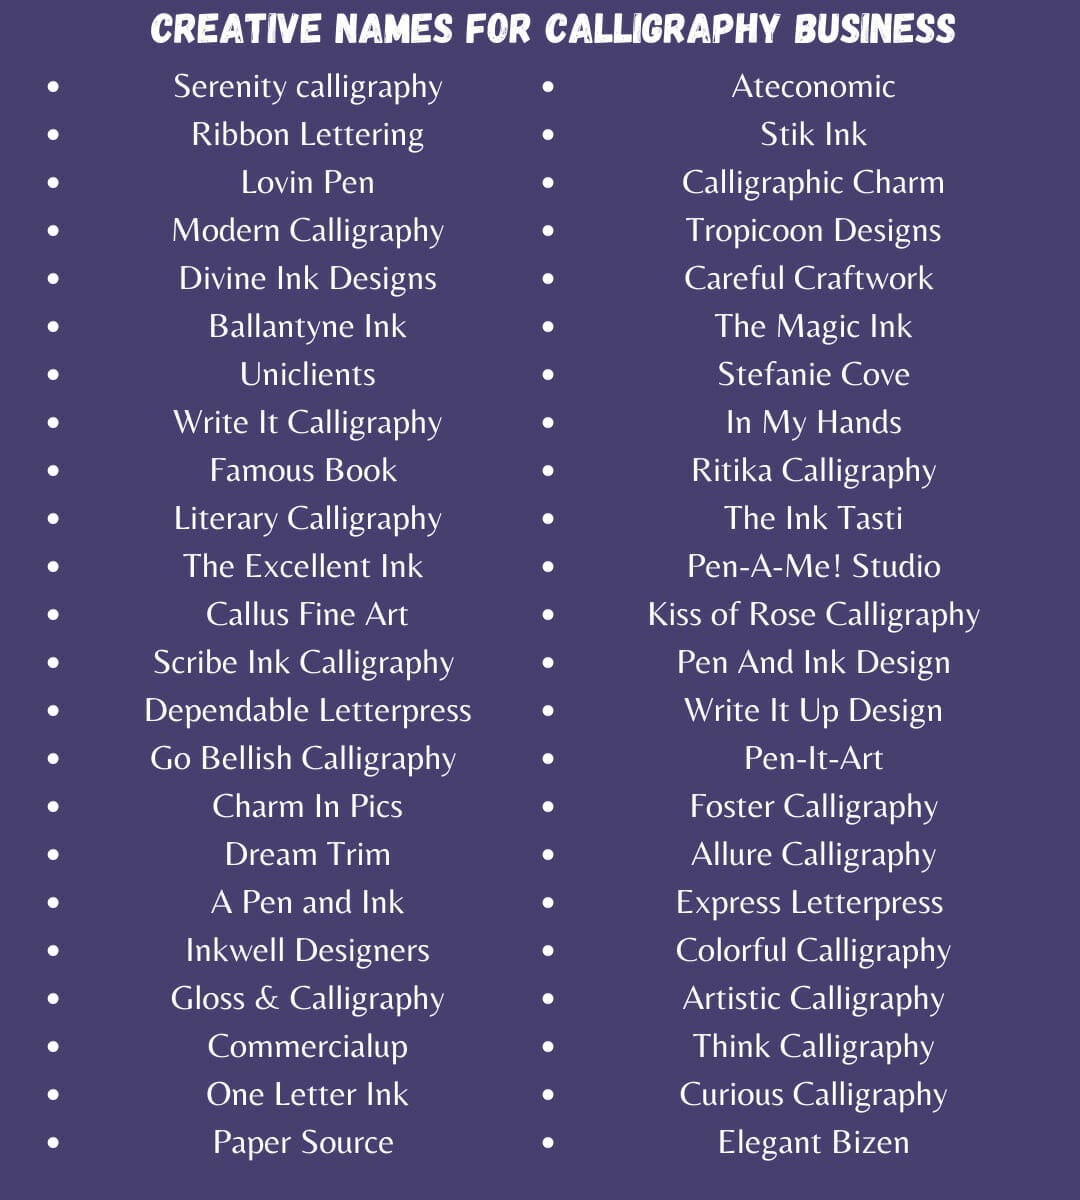 Creative Names for Calligraphy Business